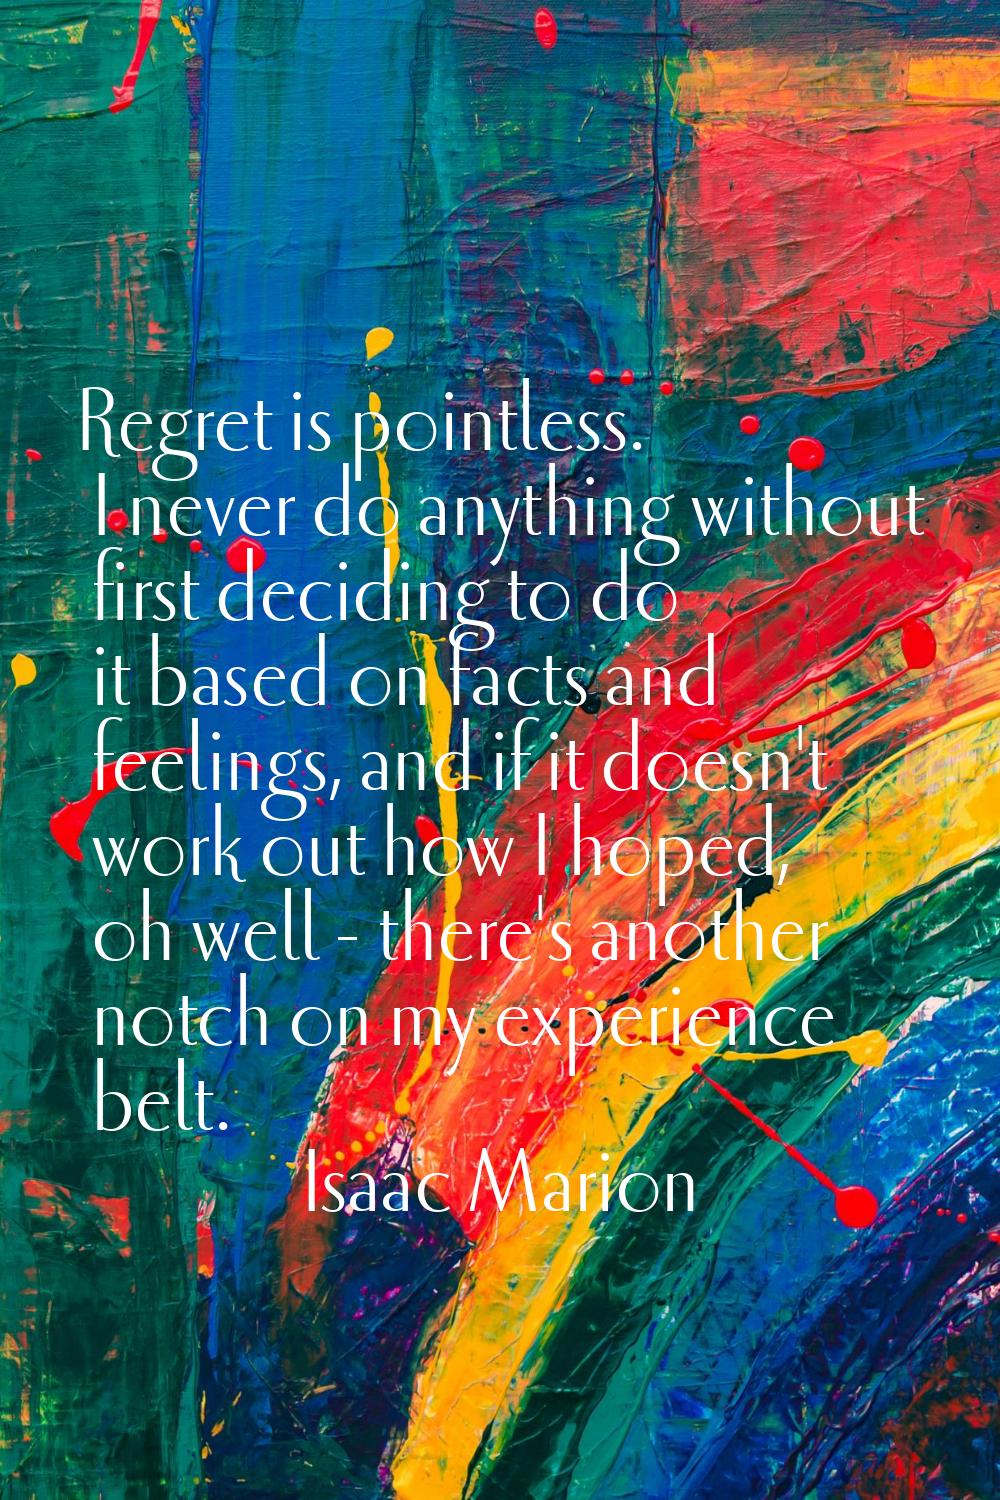 Regret is pointless. I never do anything without first deciding to do it based on facts and feeling